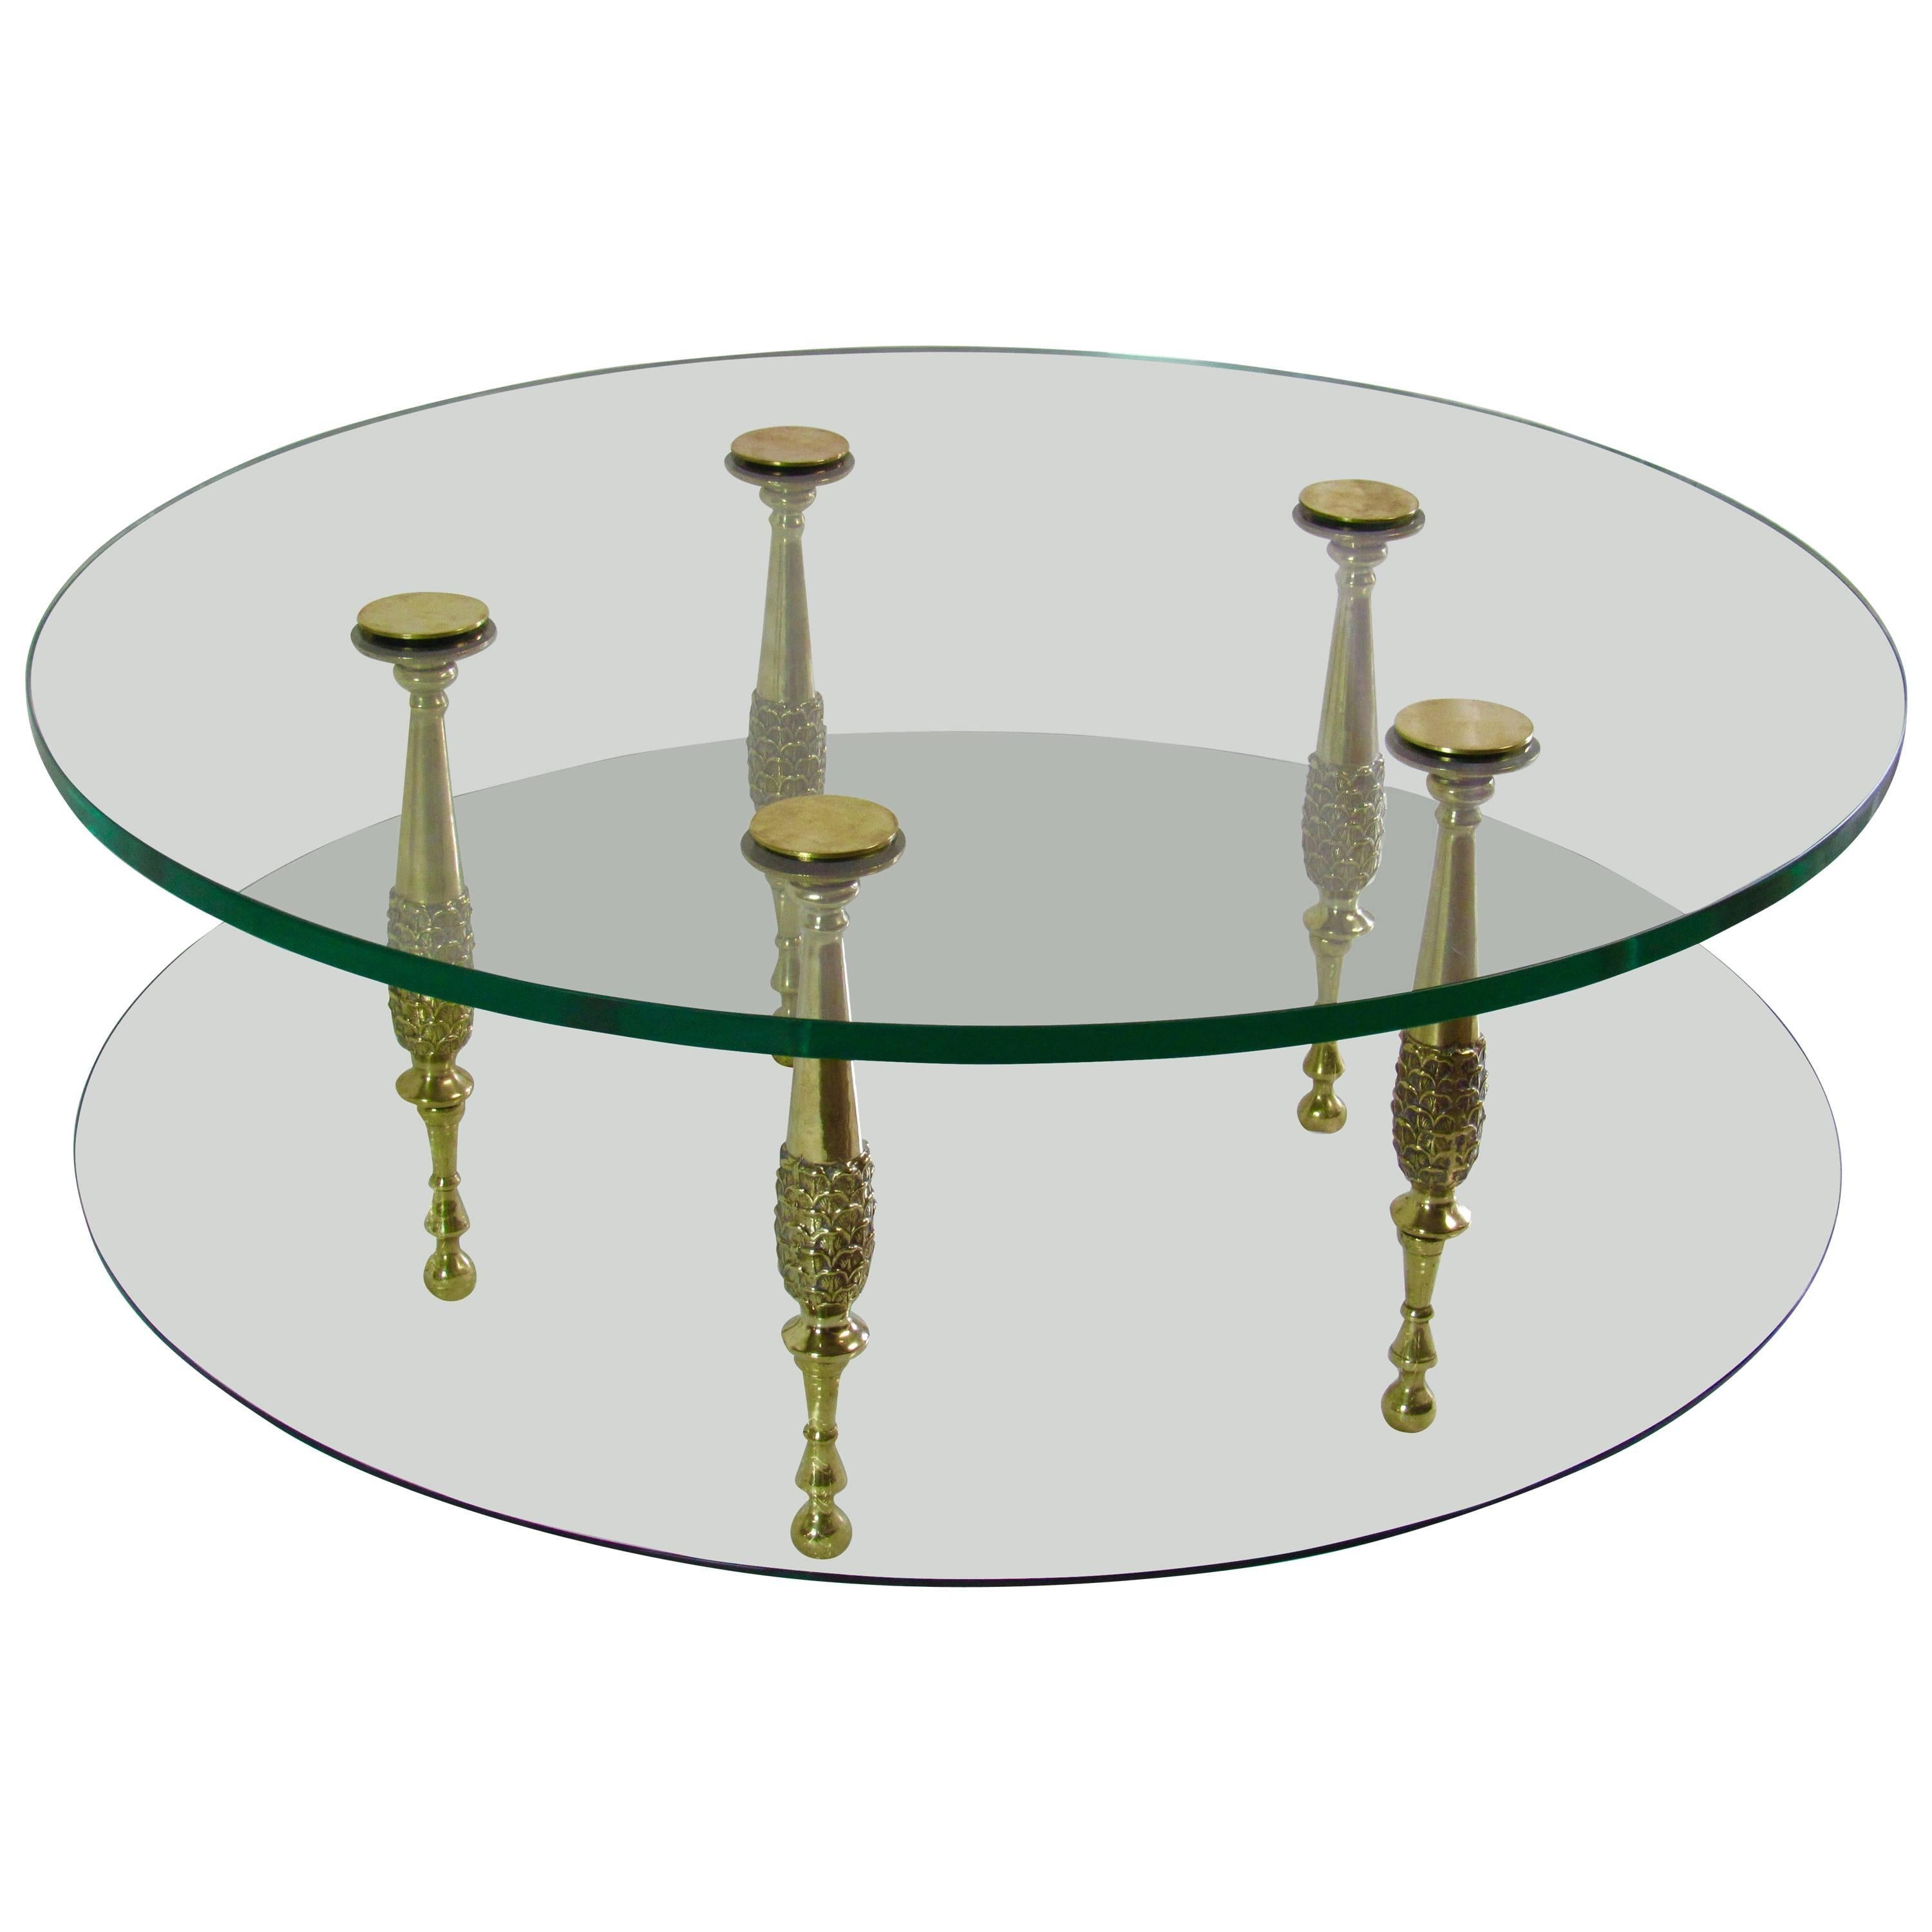 Neoclassical Italian 1950s Circular Polished Bronze and Glass Cocktail Table For Sale